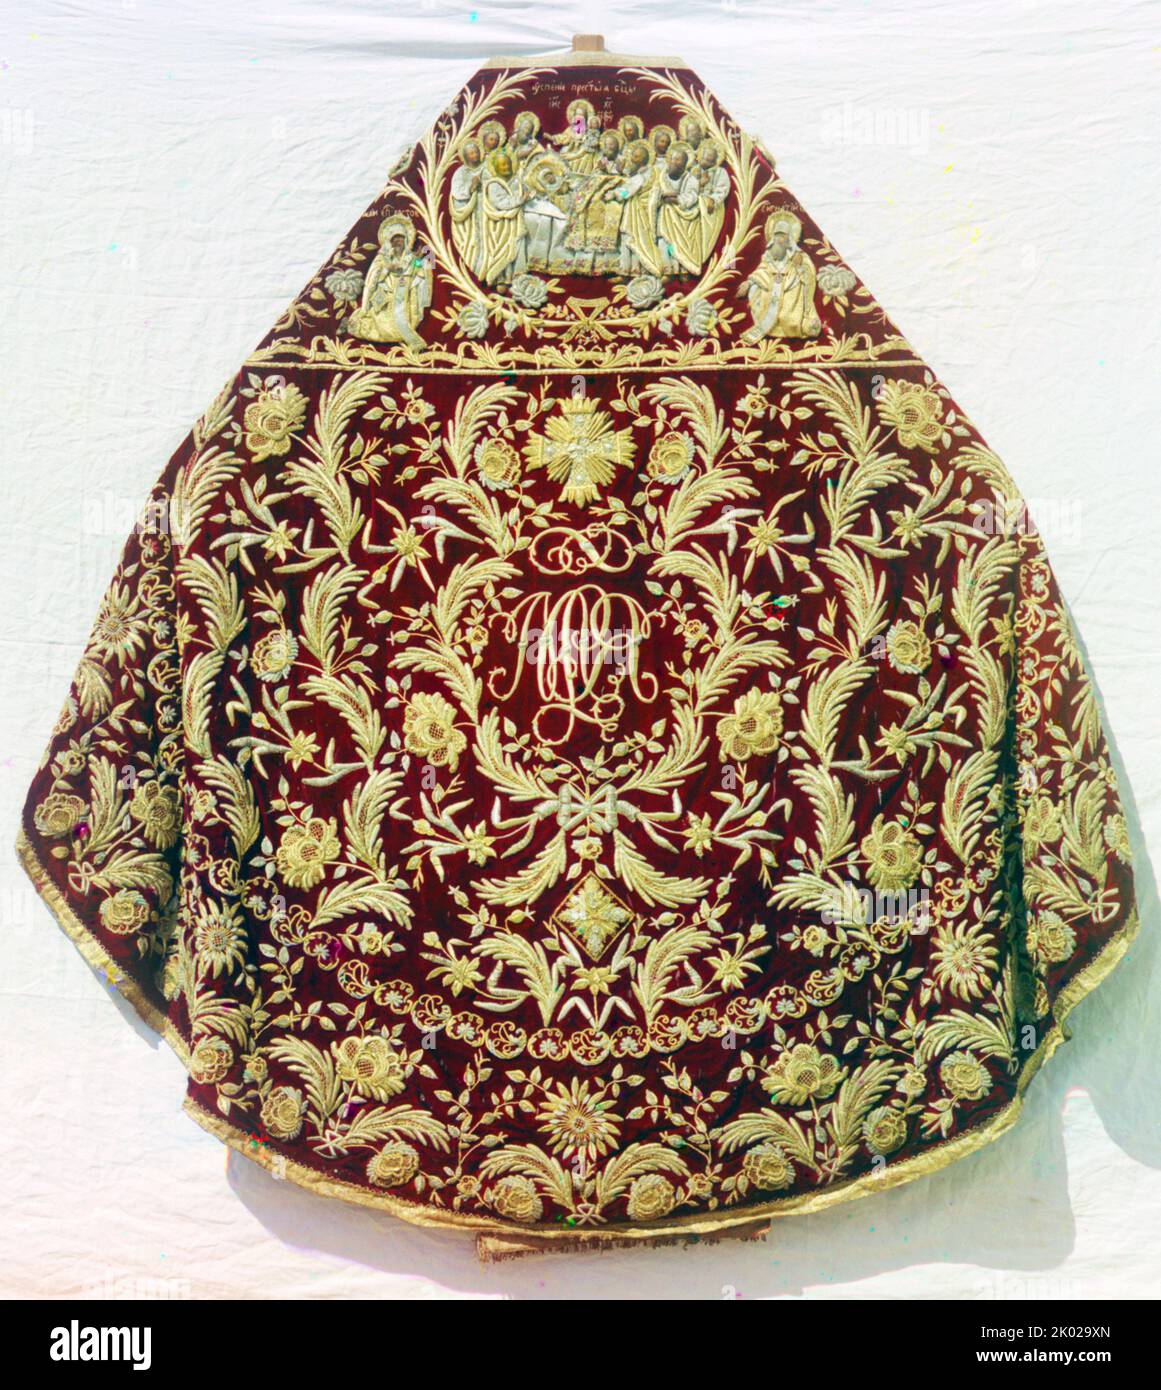 Phelonion [vestment]. From the time of Tsar Mikhail Fedorovich. In the vestry of the Assumption Cathedral. Rostov Velikii Stock Photo